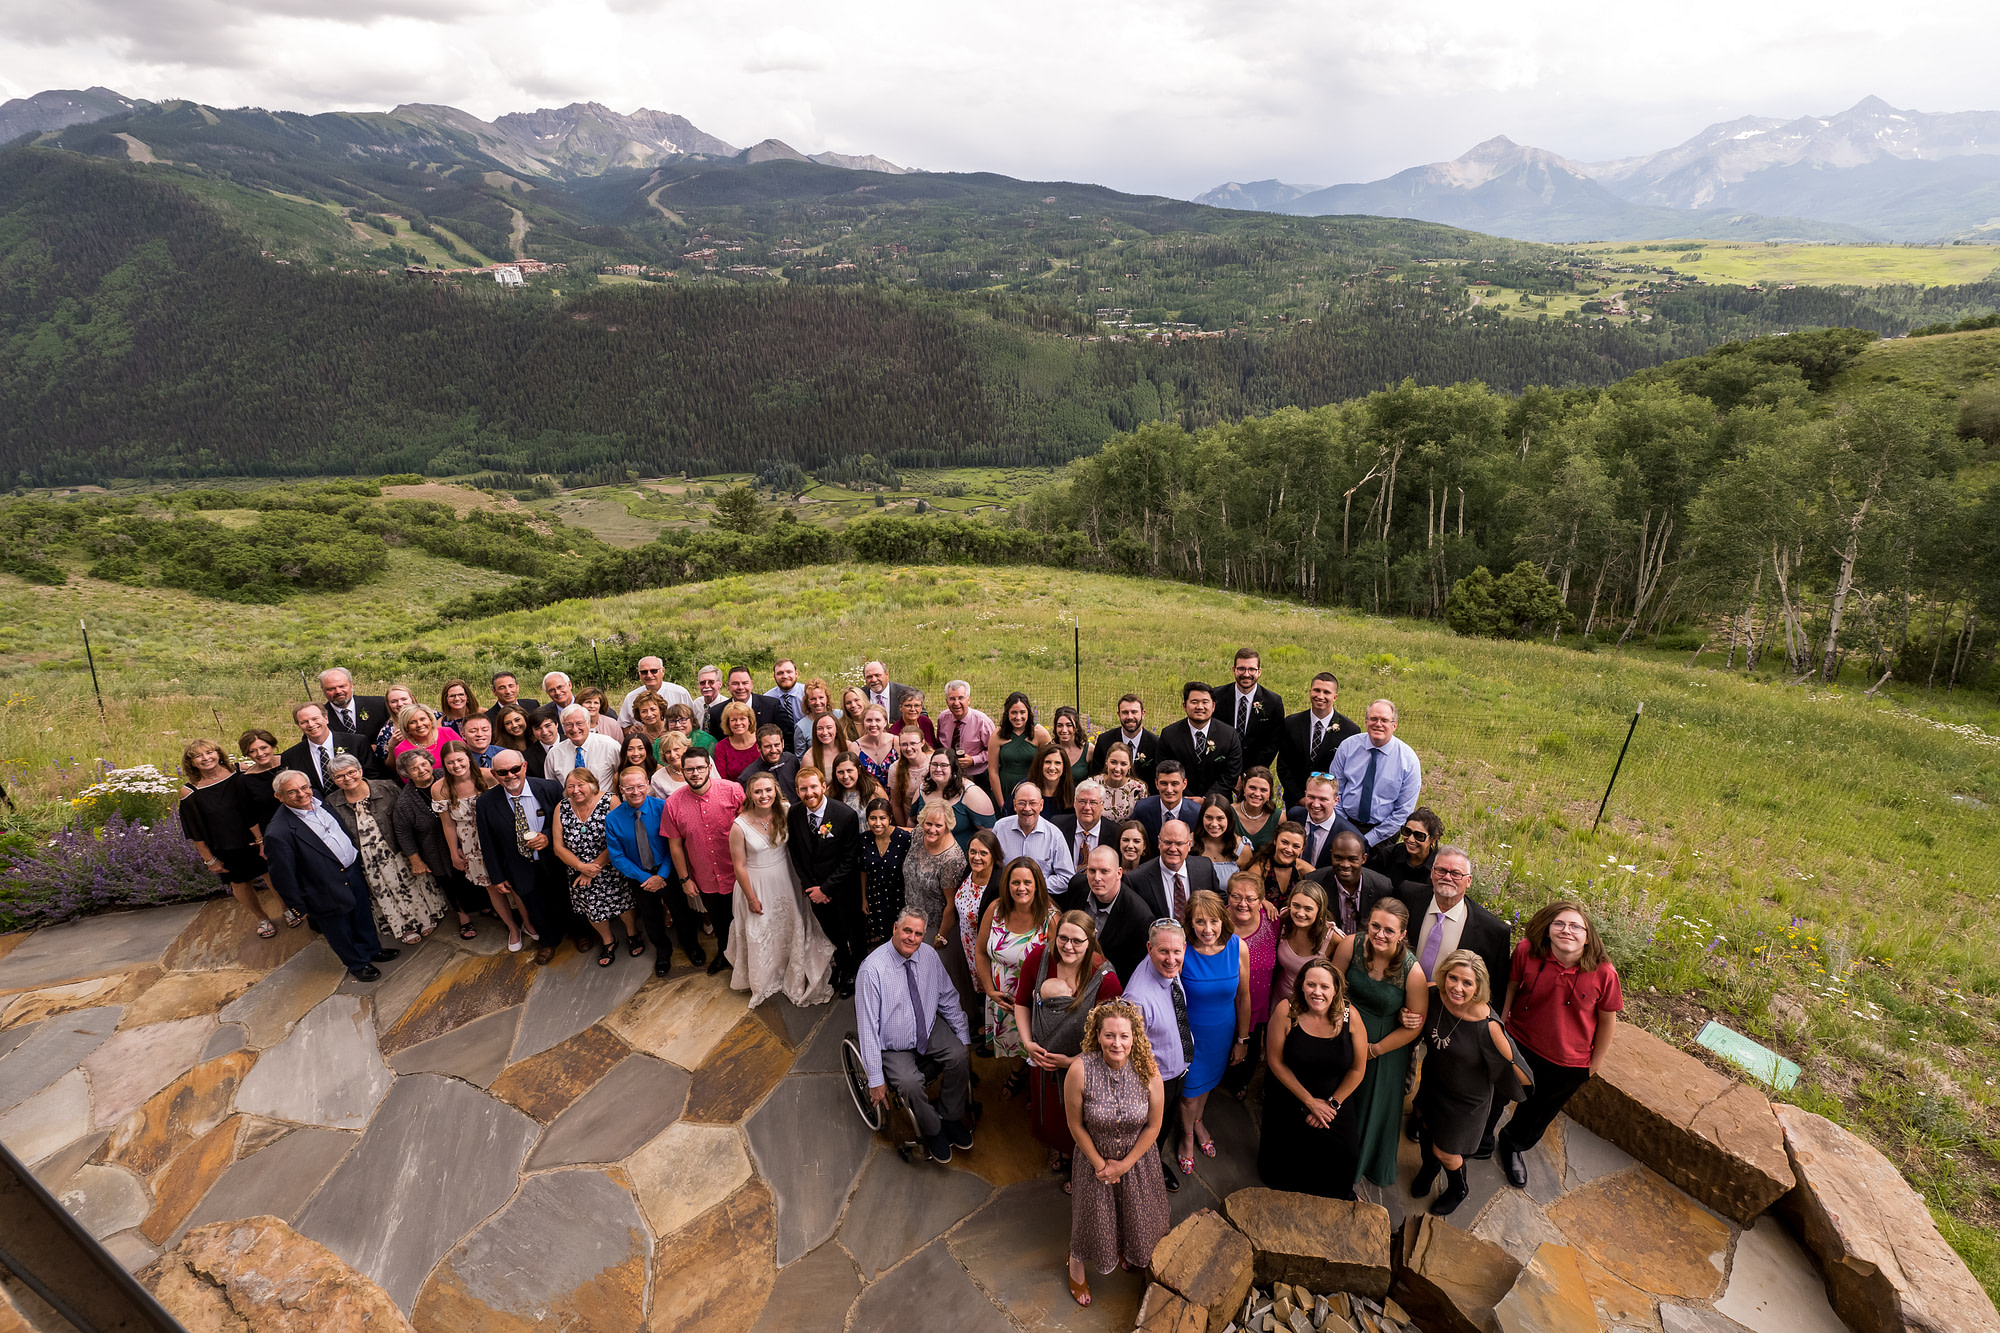 Guests pose for a photo during a wedding in Telluride, Colorado.